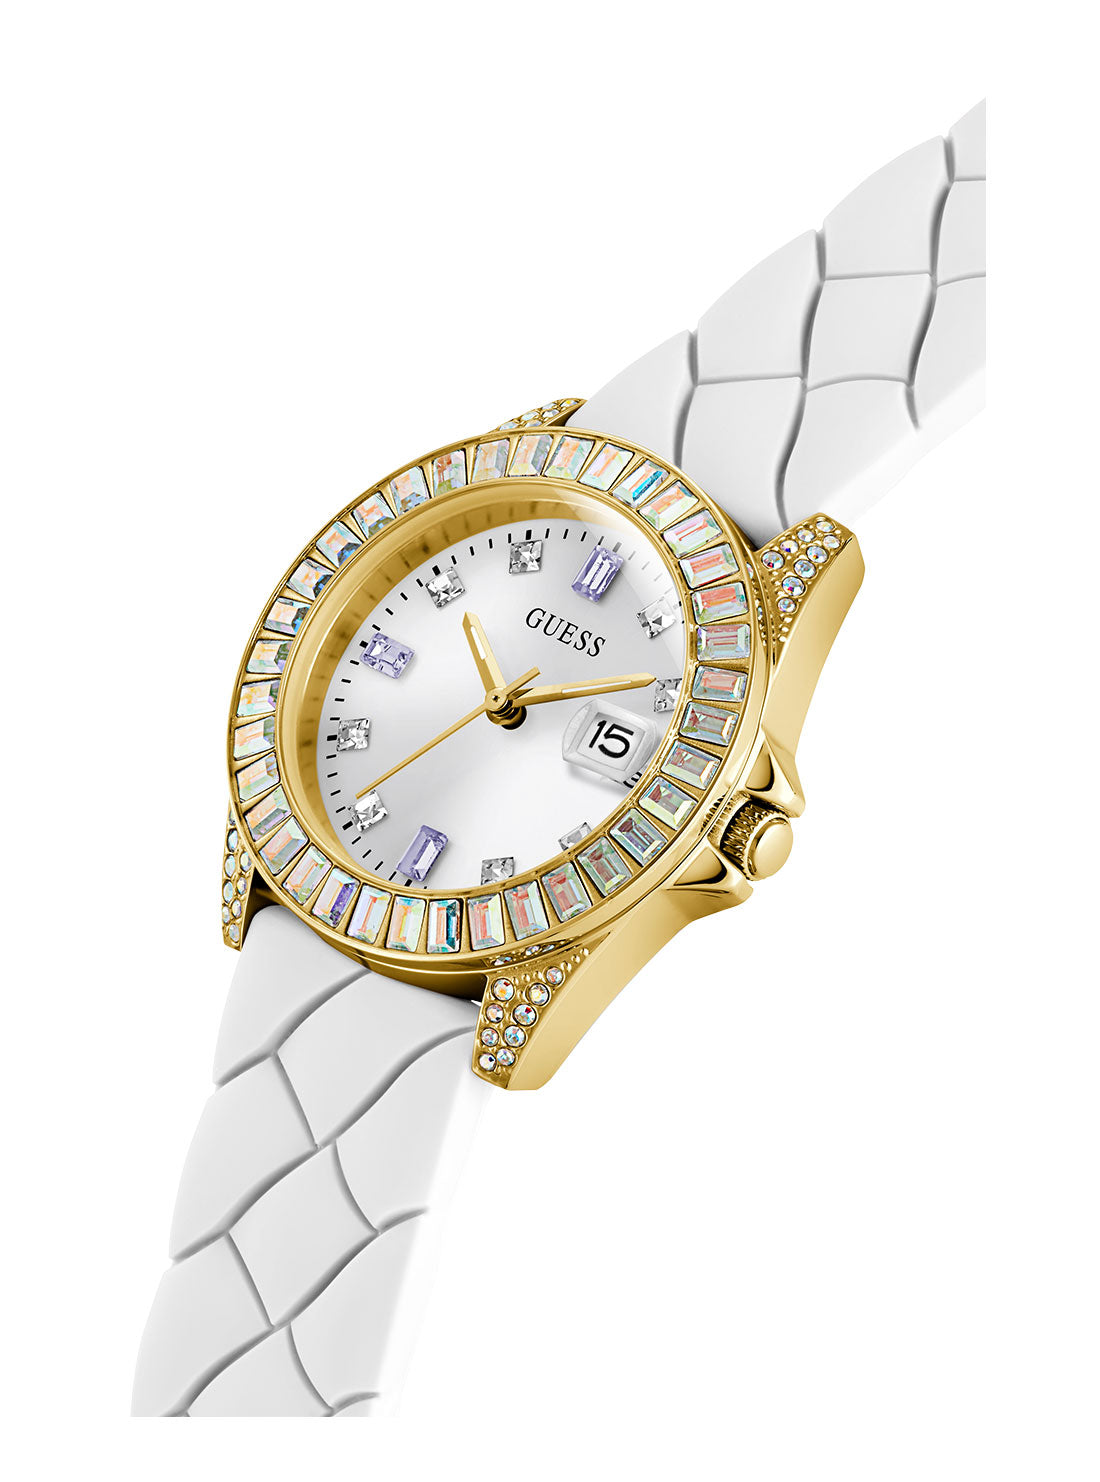 GUESS Women's White Opaline Crystal Silicone Watch GW0585L2 Angle View